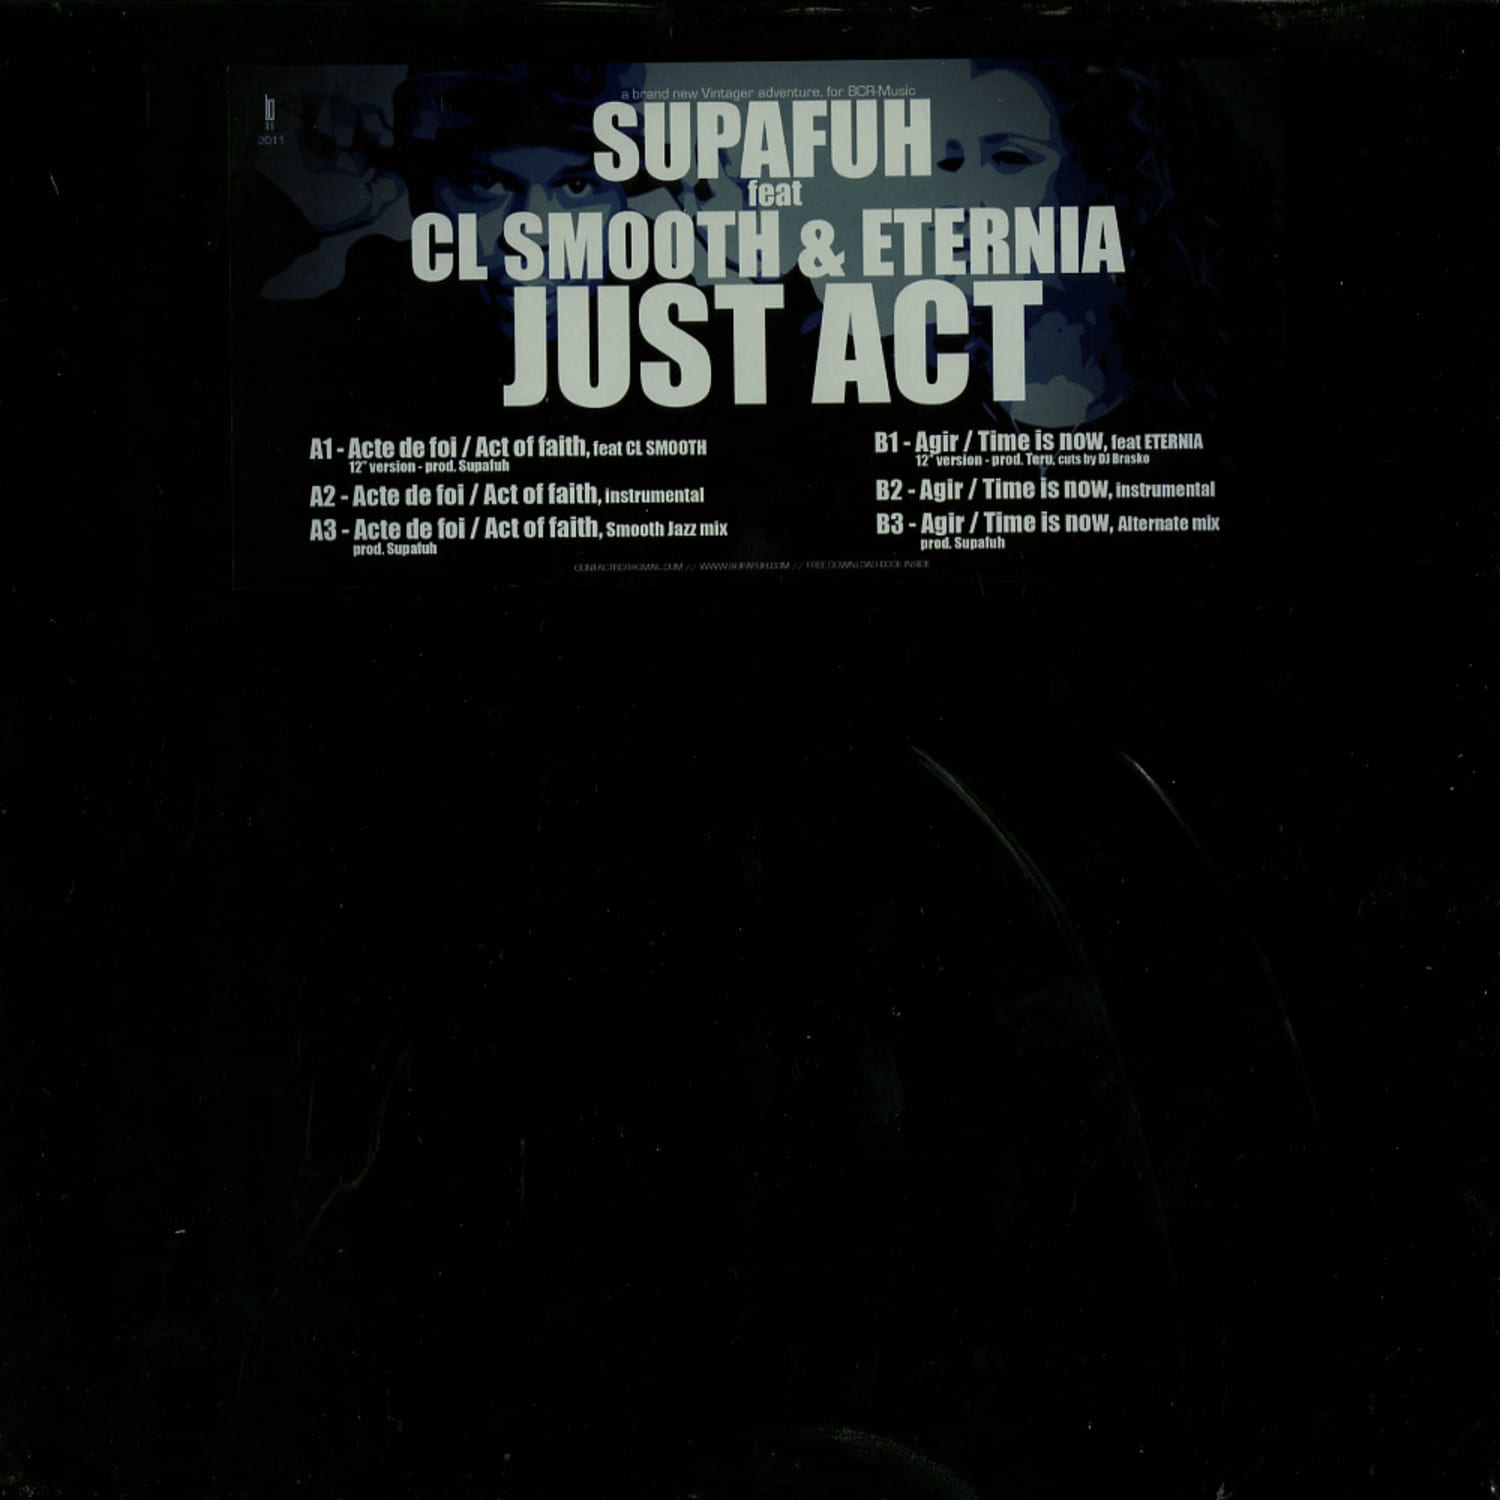 Supafuh - JUST ACT FT. CL SMOOTH & ETERNIA